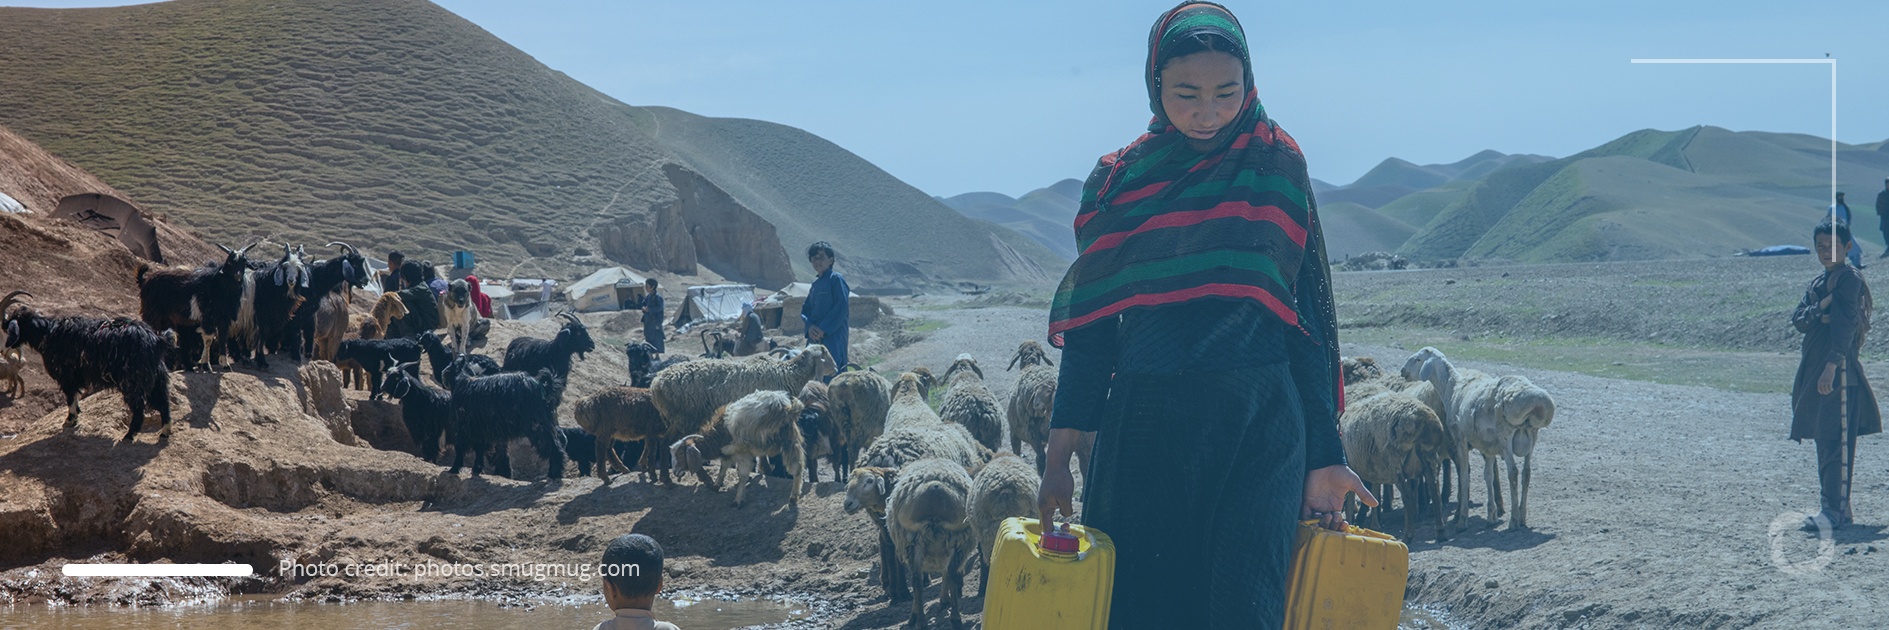 At least 3 million Afghans will be affected by severe droughts